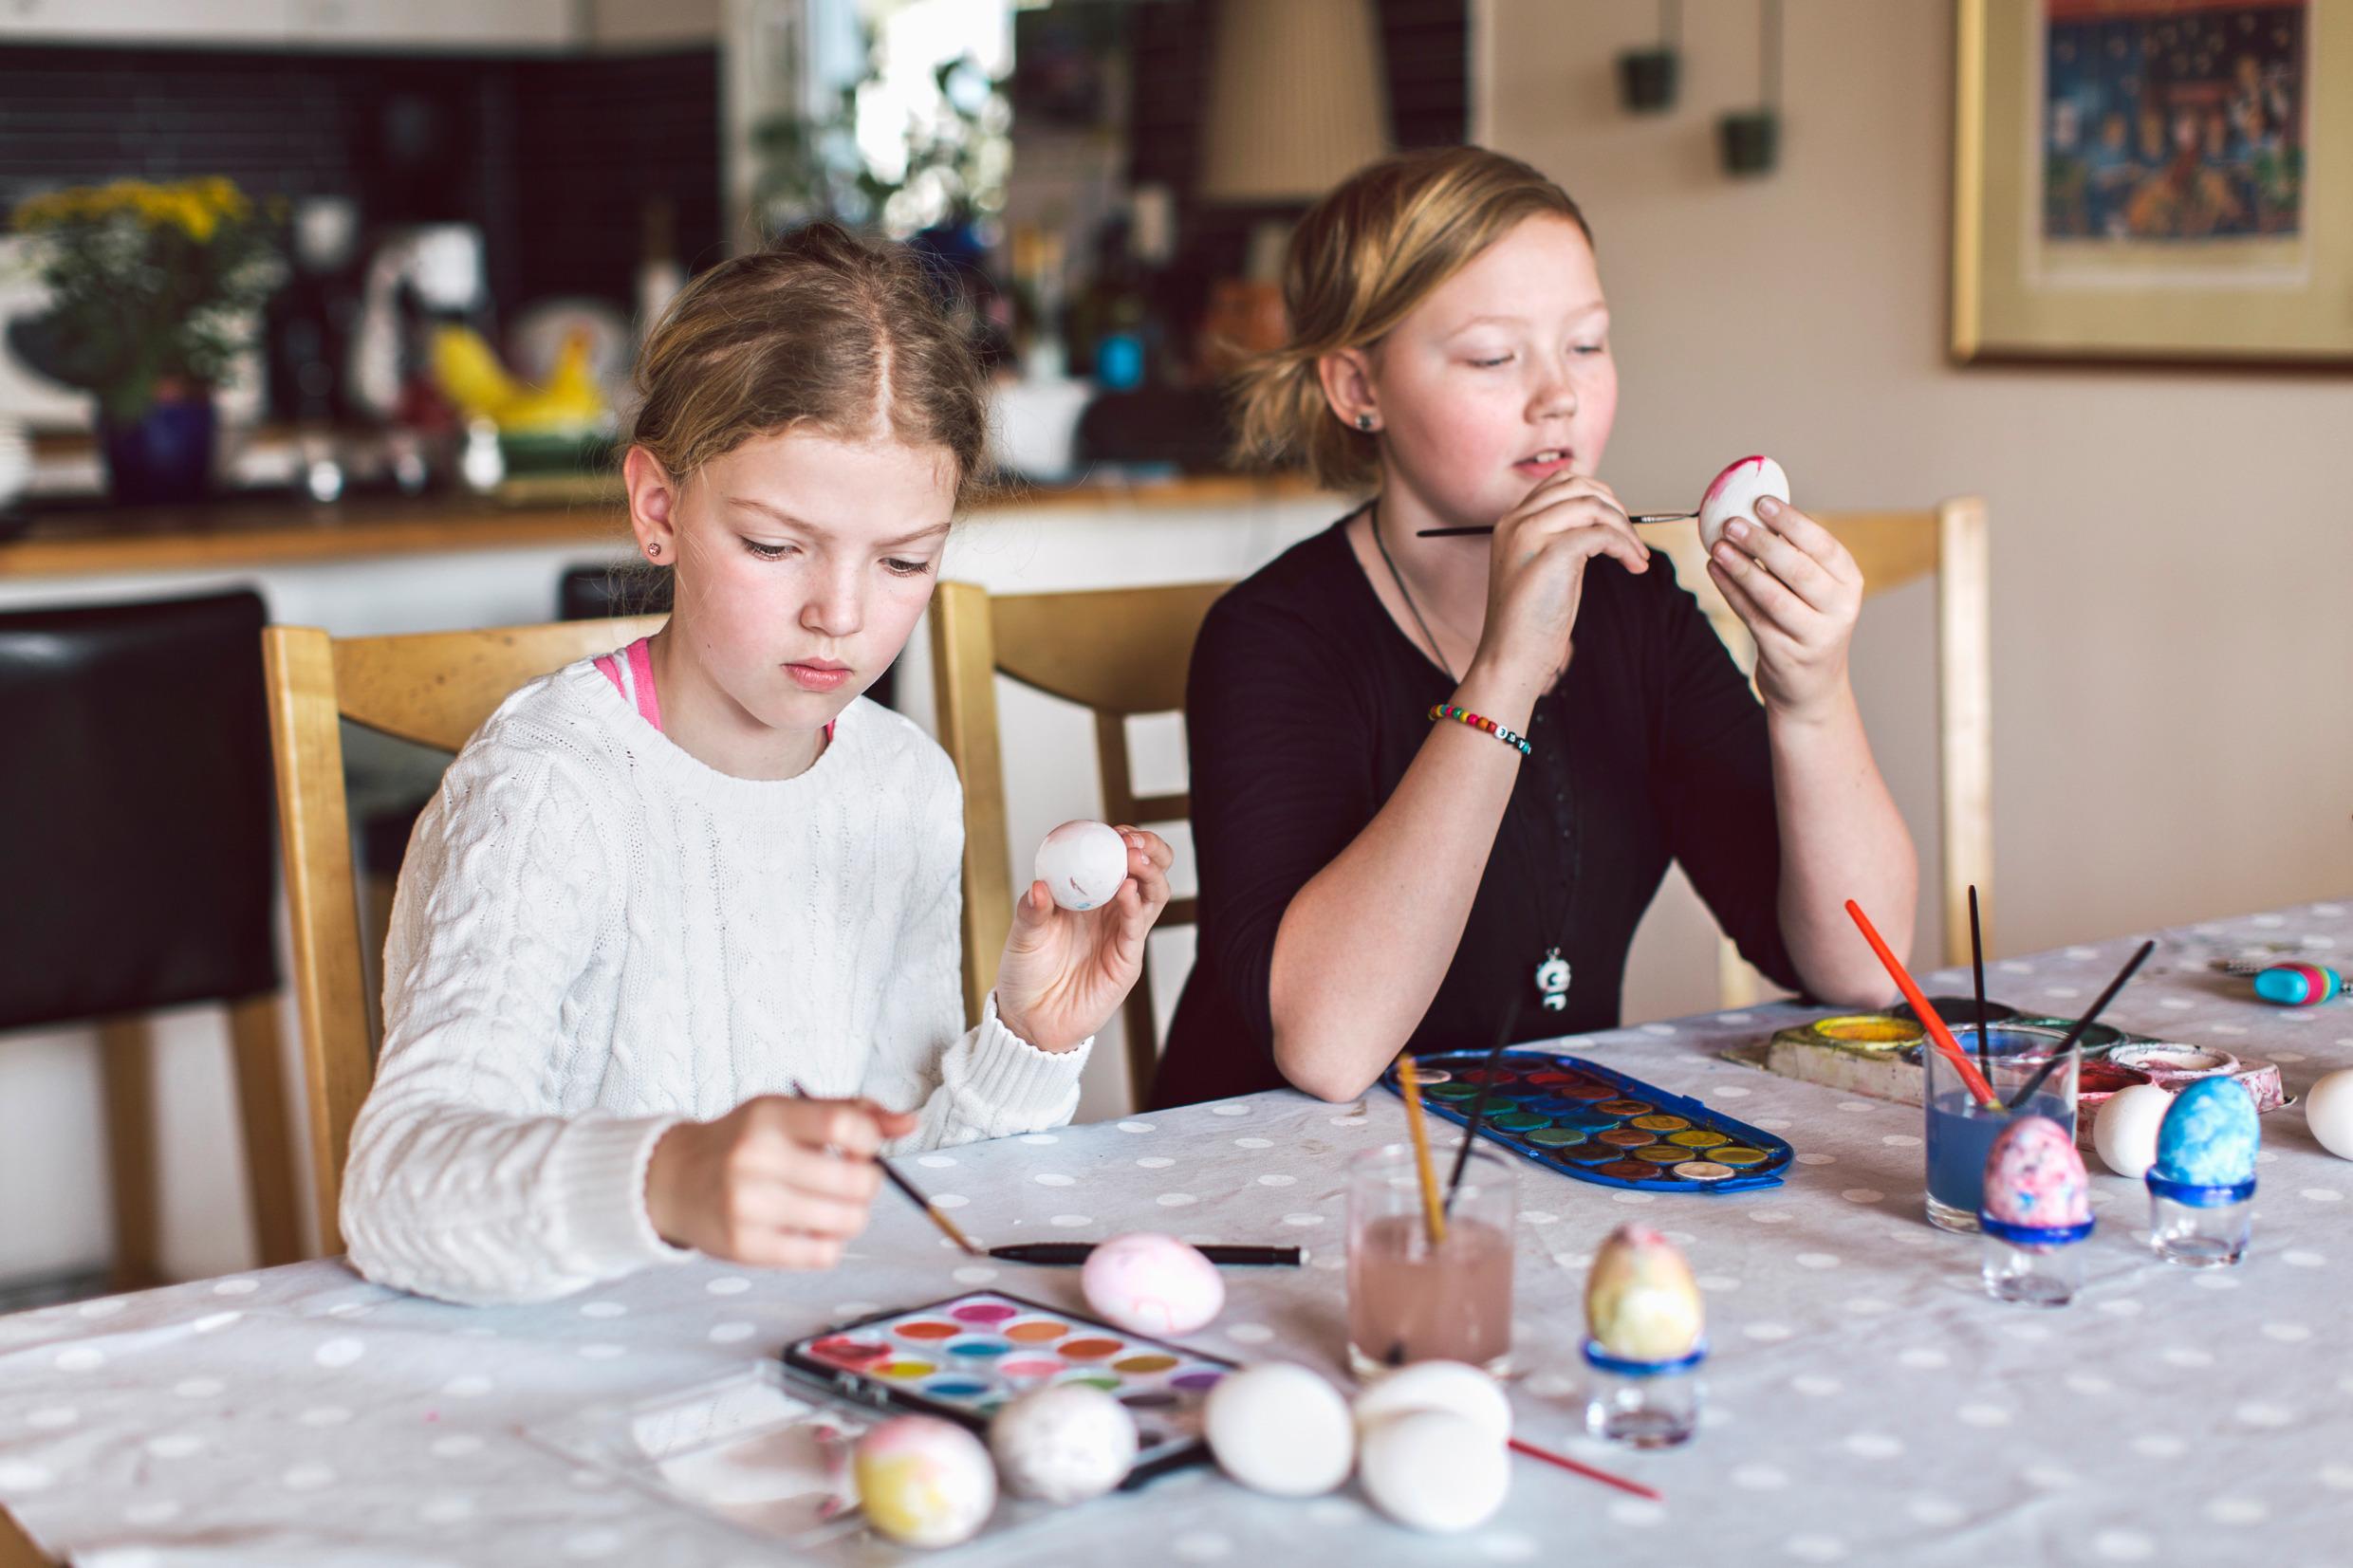 Two children paint on boiled eggs.